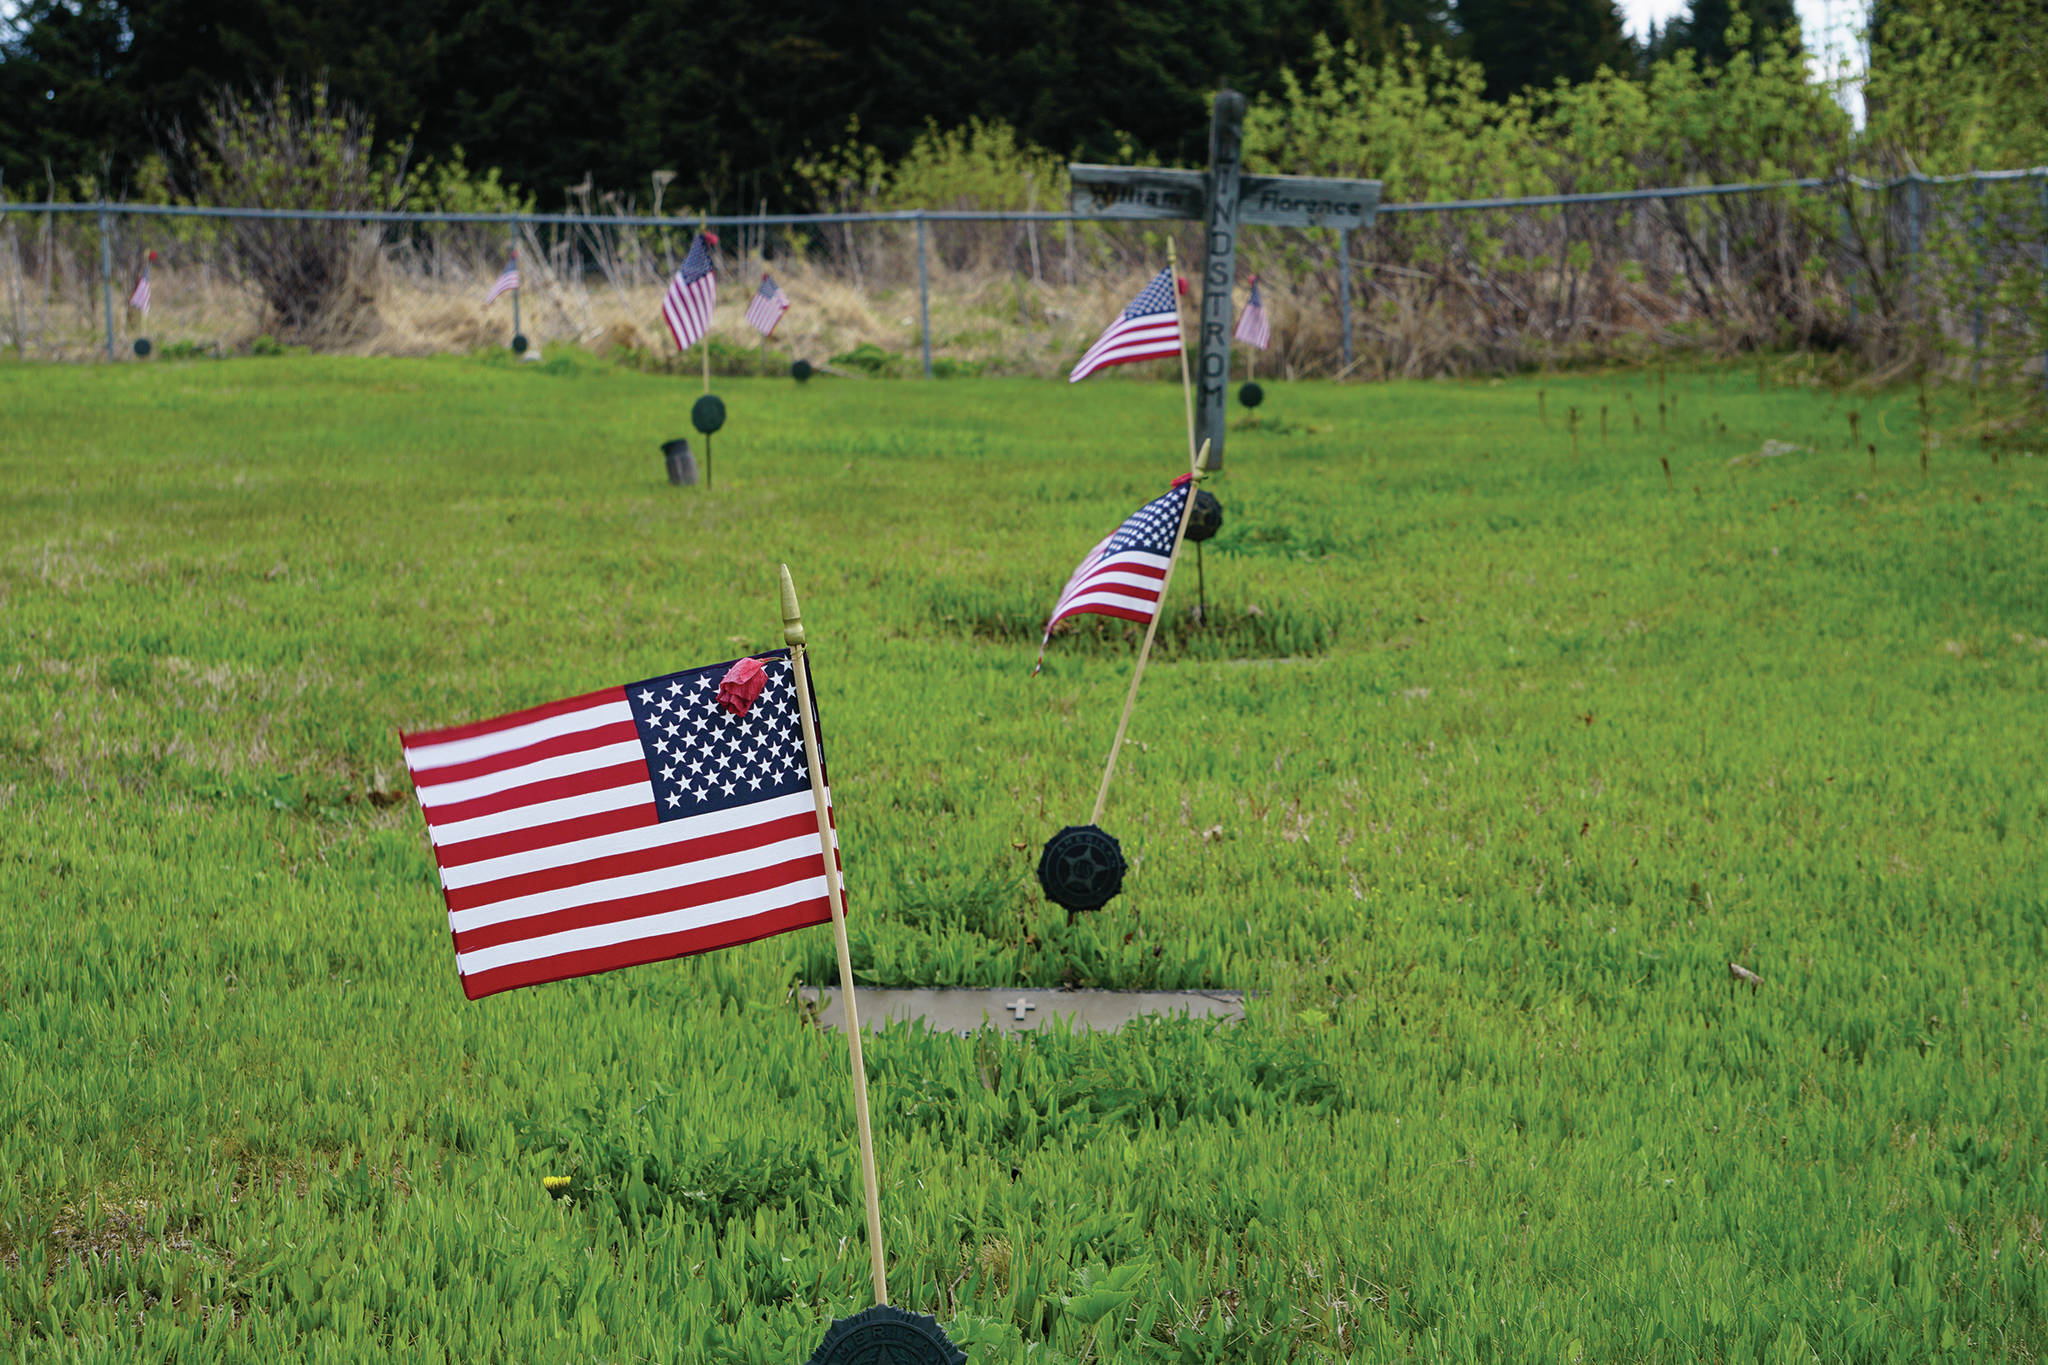 American flags decorate the graves of veterans buried in the Hickerson Memorial Cemetery on Diamond Ridge near Homer, Alaska. Memorial Day observances were held at the cemetery on Monday, May 25, 2020. The war dead include men and women who served in every U.S. war since World War I. (Photo by Michael Armstrong/Homer News)